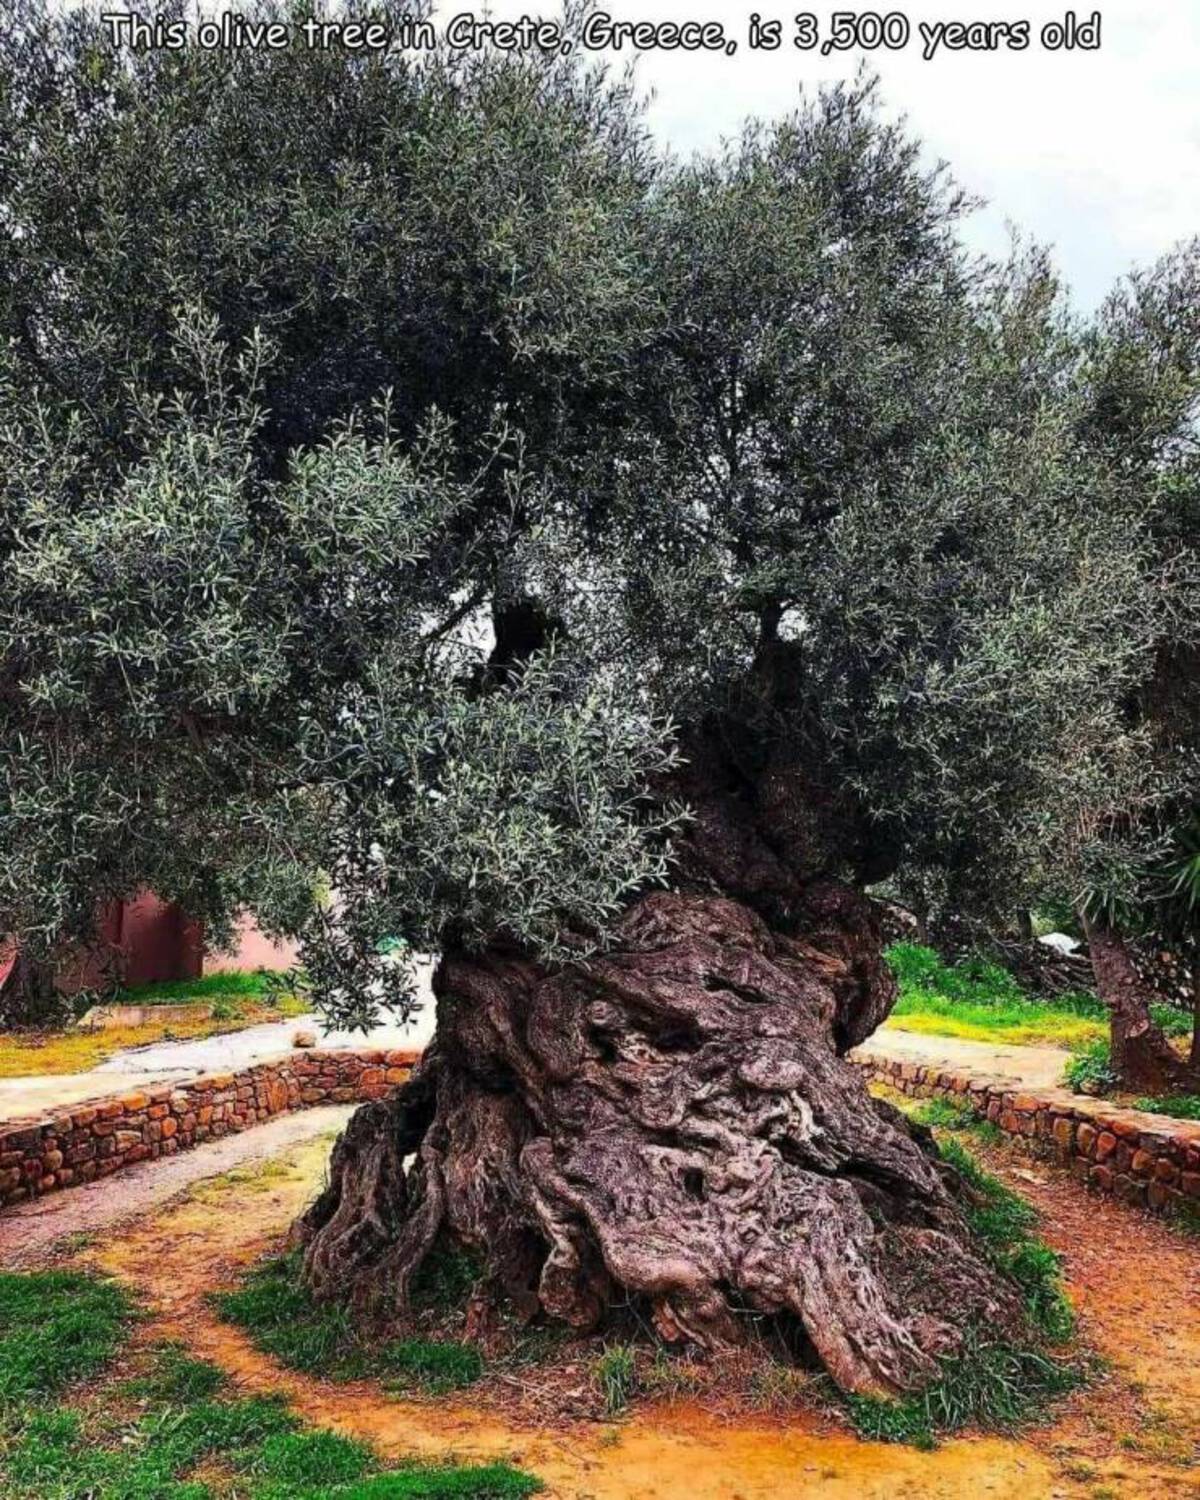 oldest olive tree in the world - This olive tree in Crete, Greece, is 3,500 years old